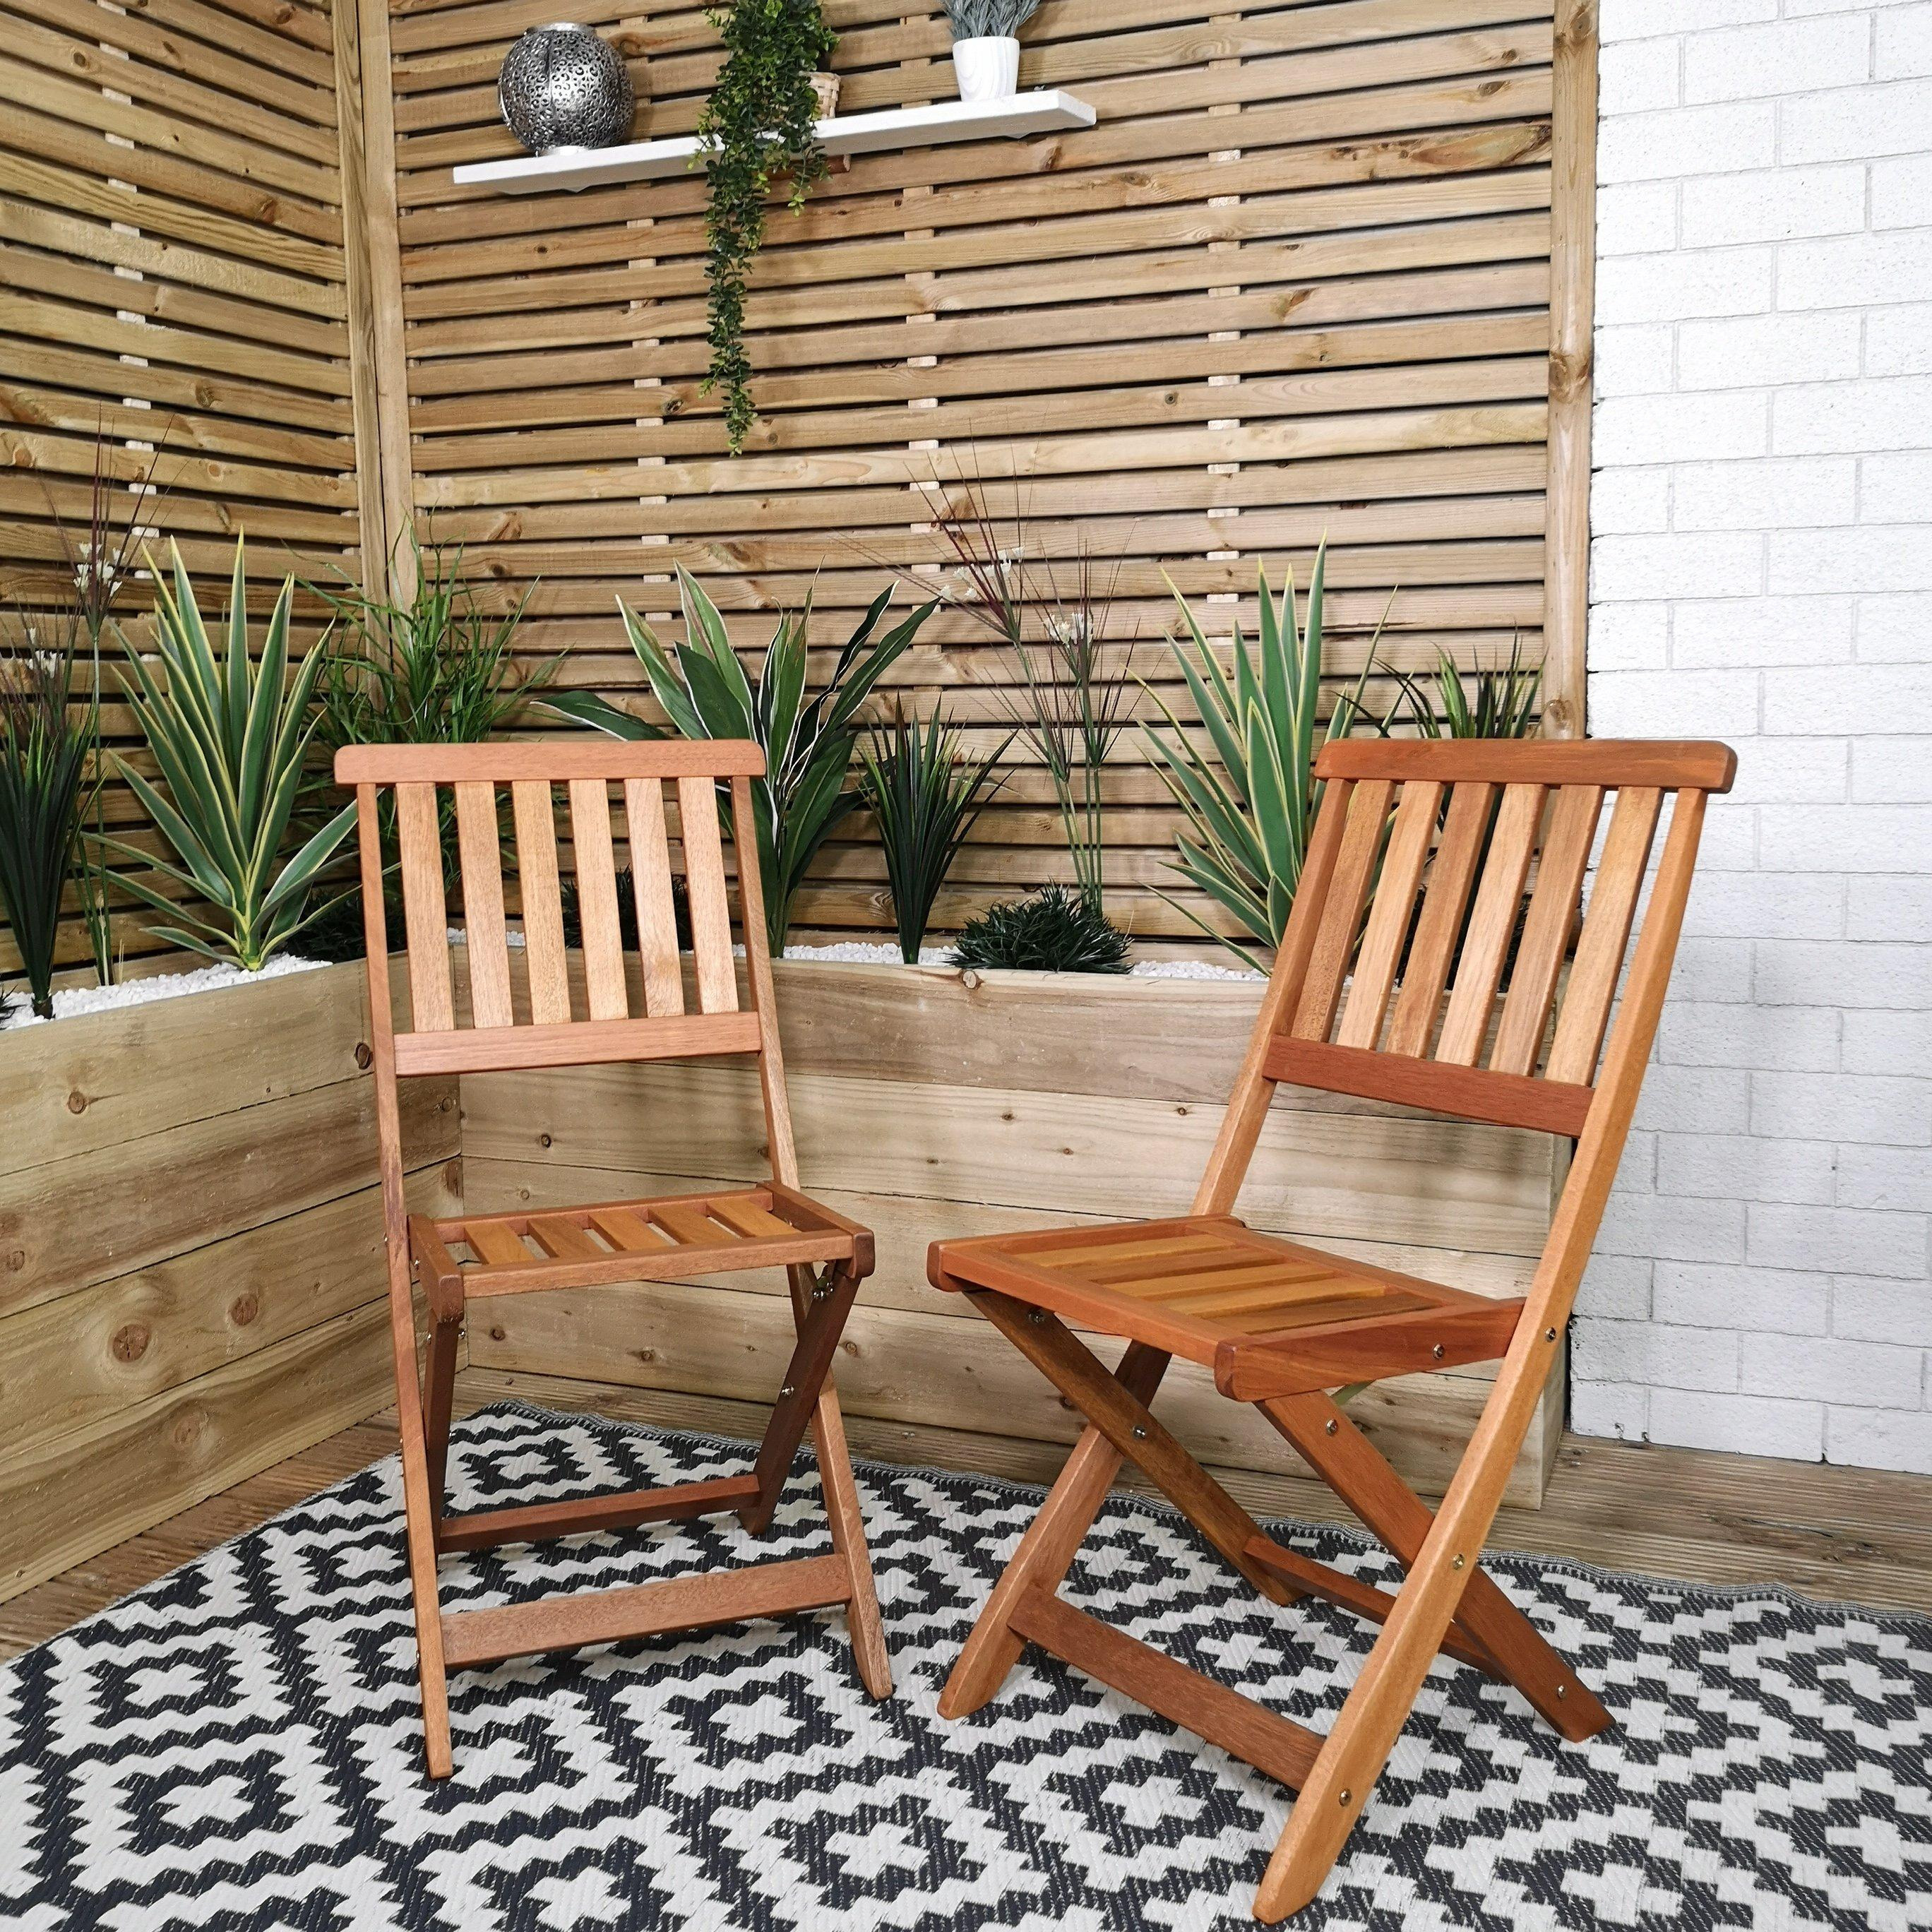 Set of 2 Bowness Outdoor Garden Patio Wooden Folding Chairs - image 1